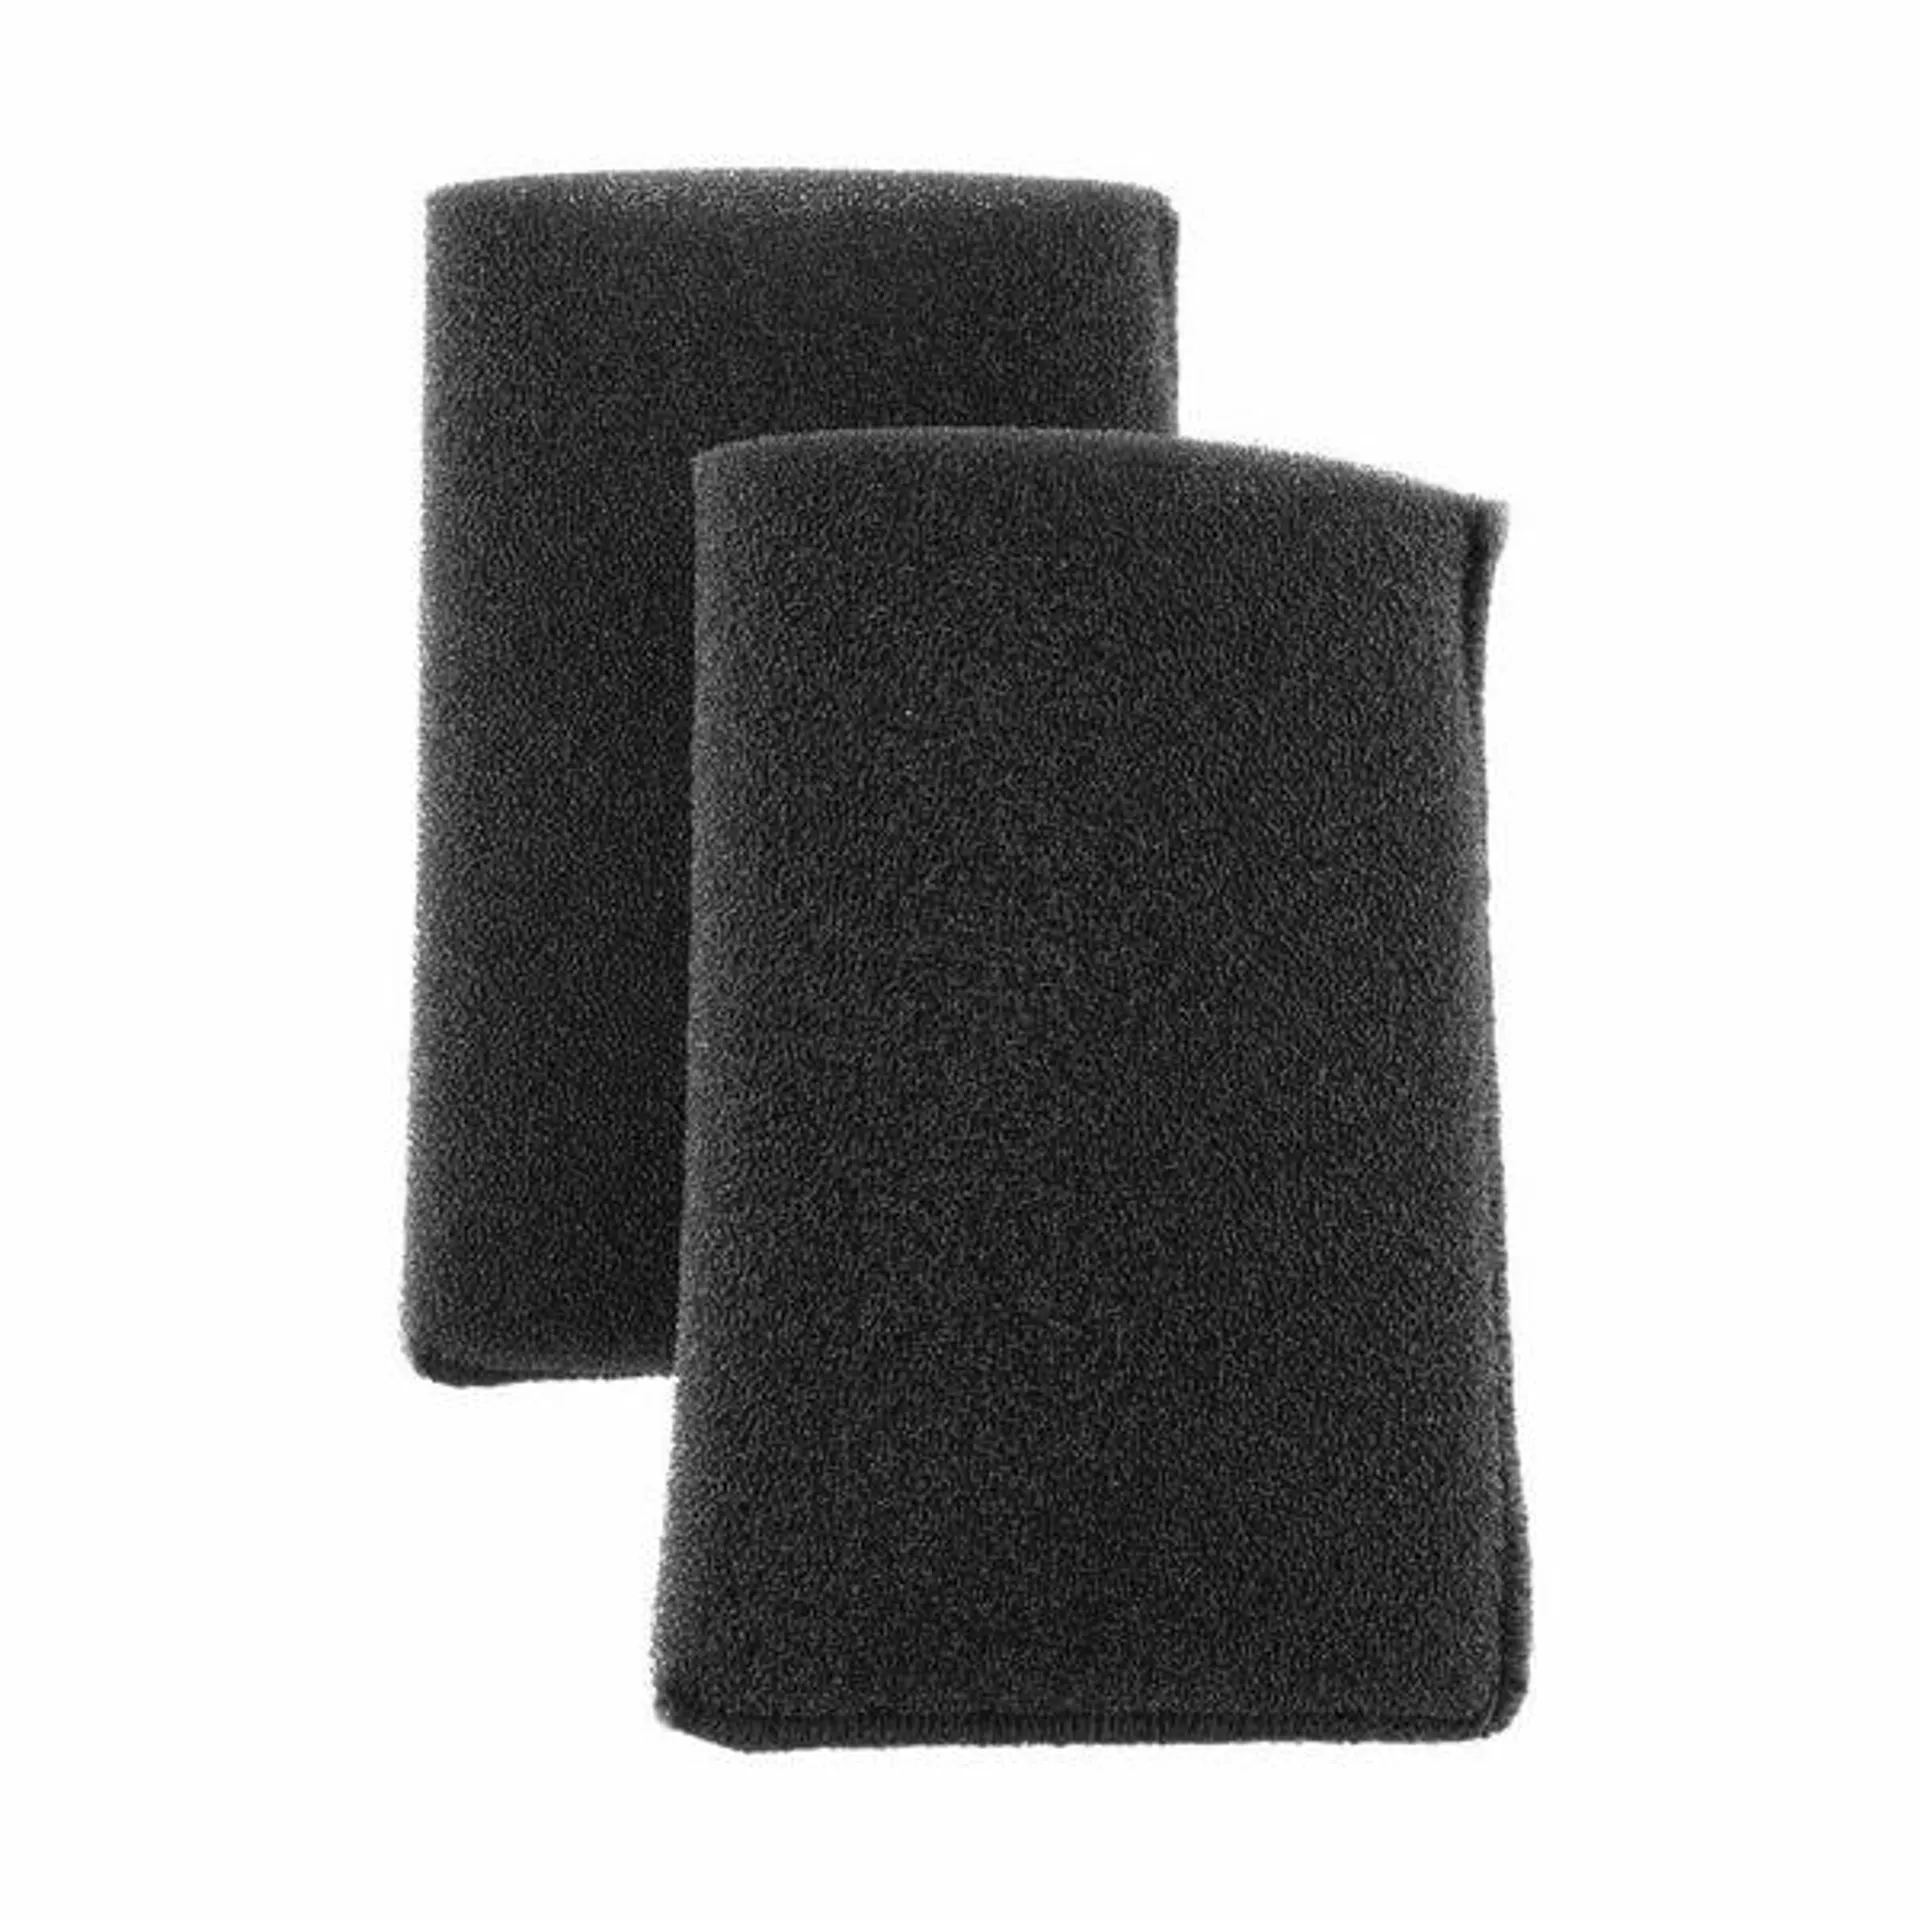 SMALL WET/DRY FOAM FILTERS (2-PACK)